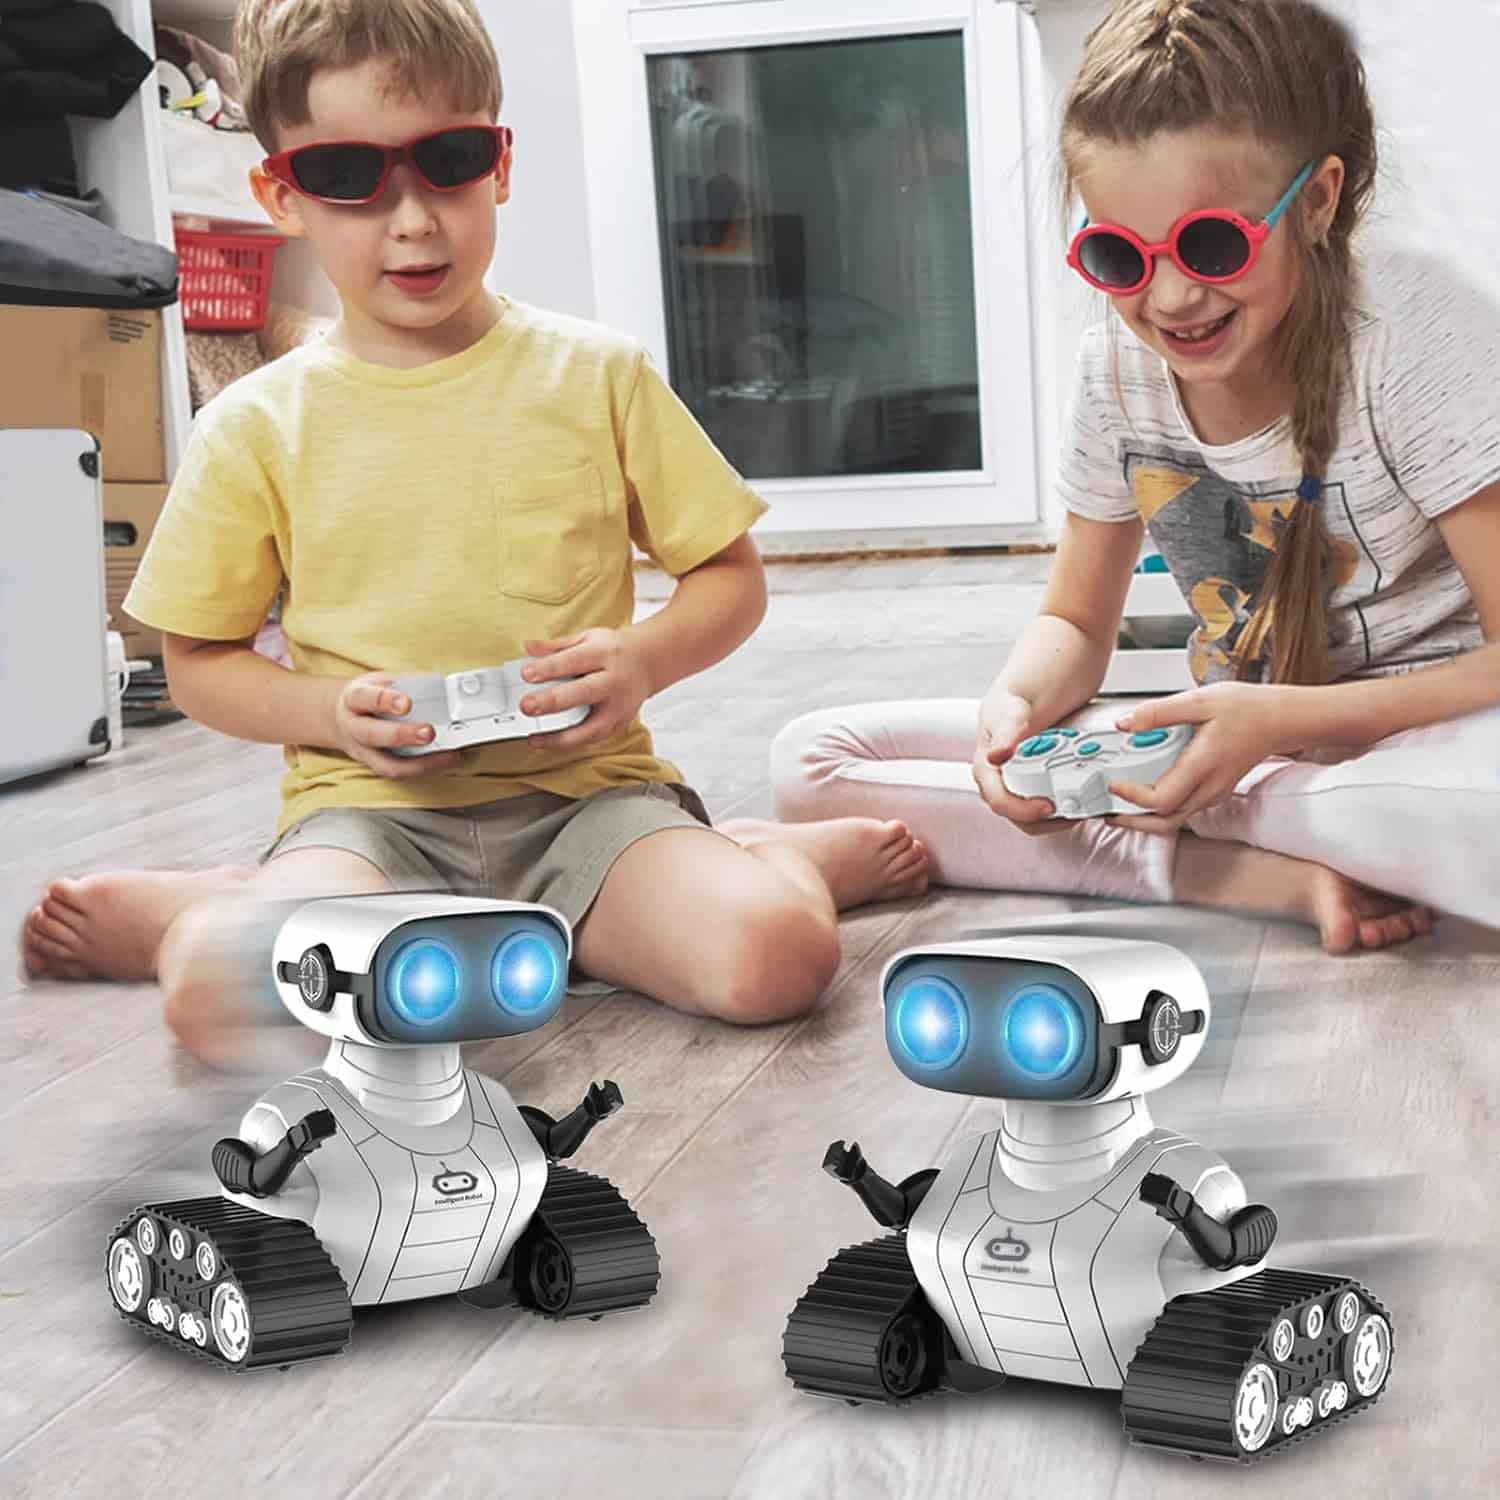 CUUPA Robot Toys: The Perfect Remote Control Robots for Kids